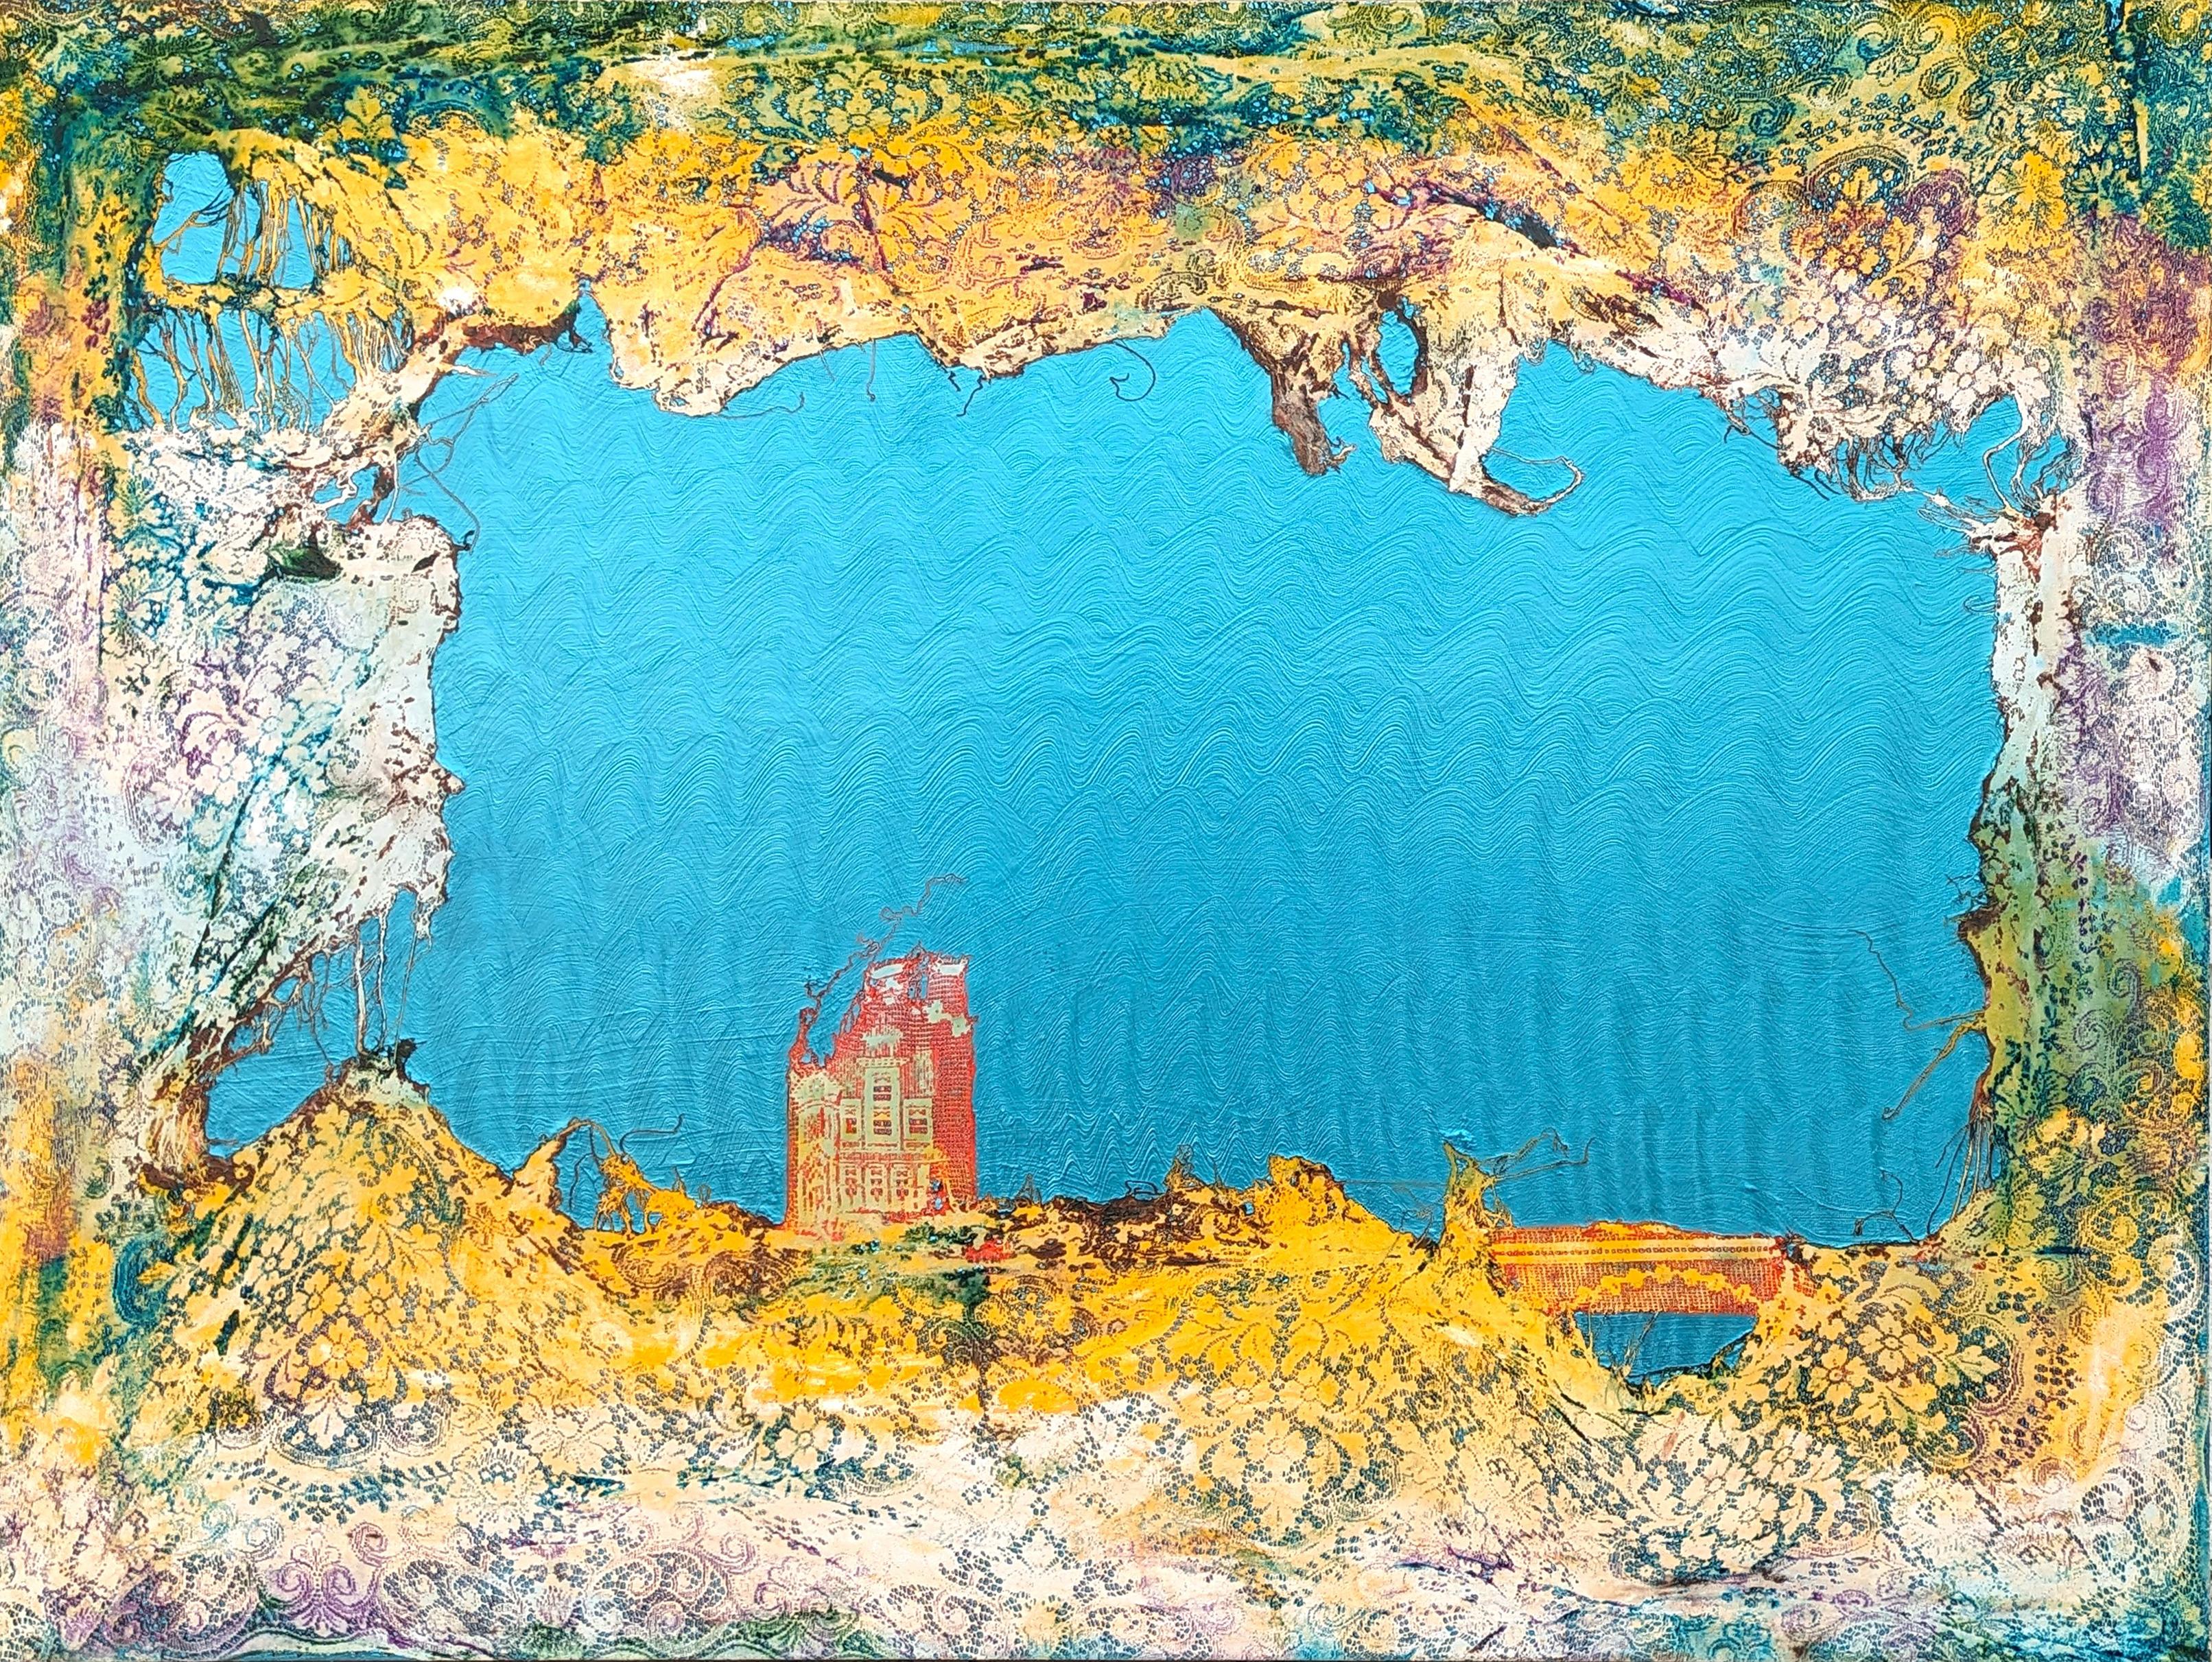 Mark Flood Landscape Painting – "Udolpho" Contemporary Abstract Teal, Yellow, and Green Lace Painting